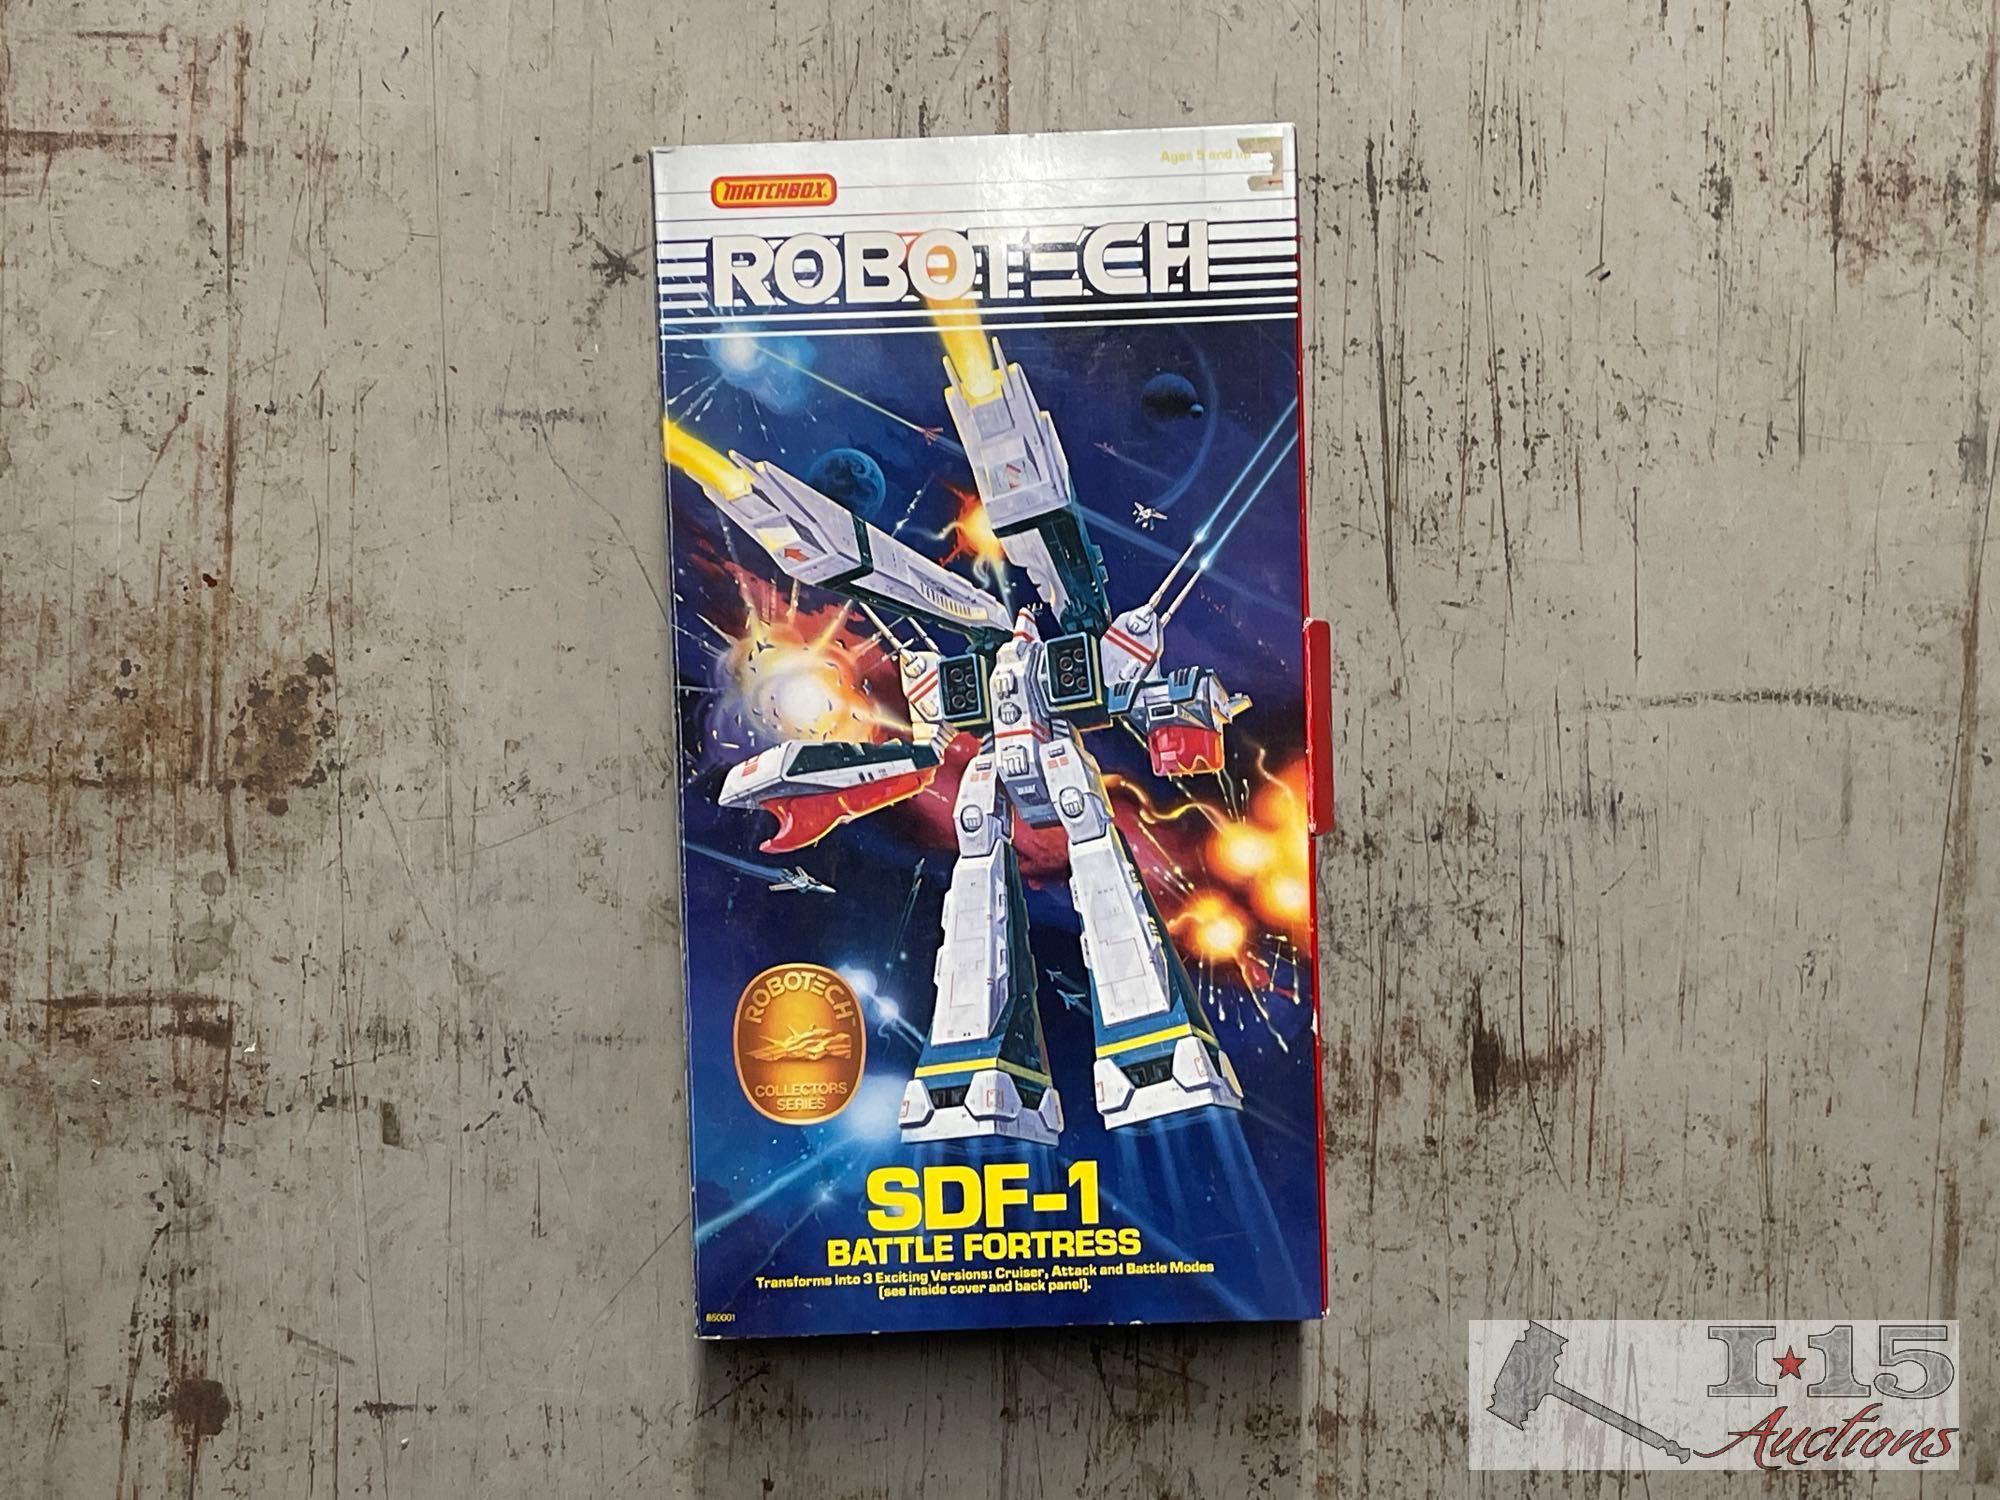 Robotech Figurines and Empty Boxes